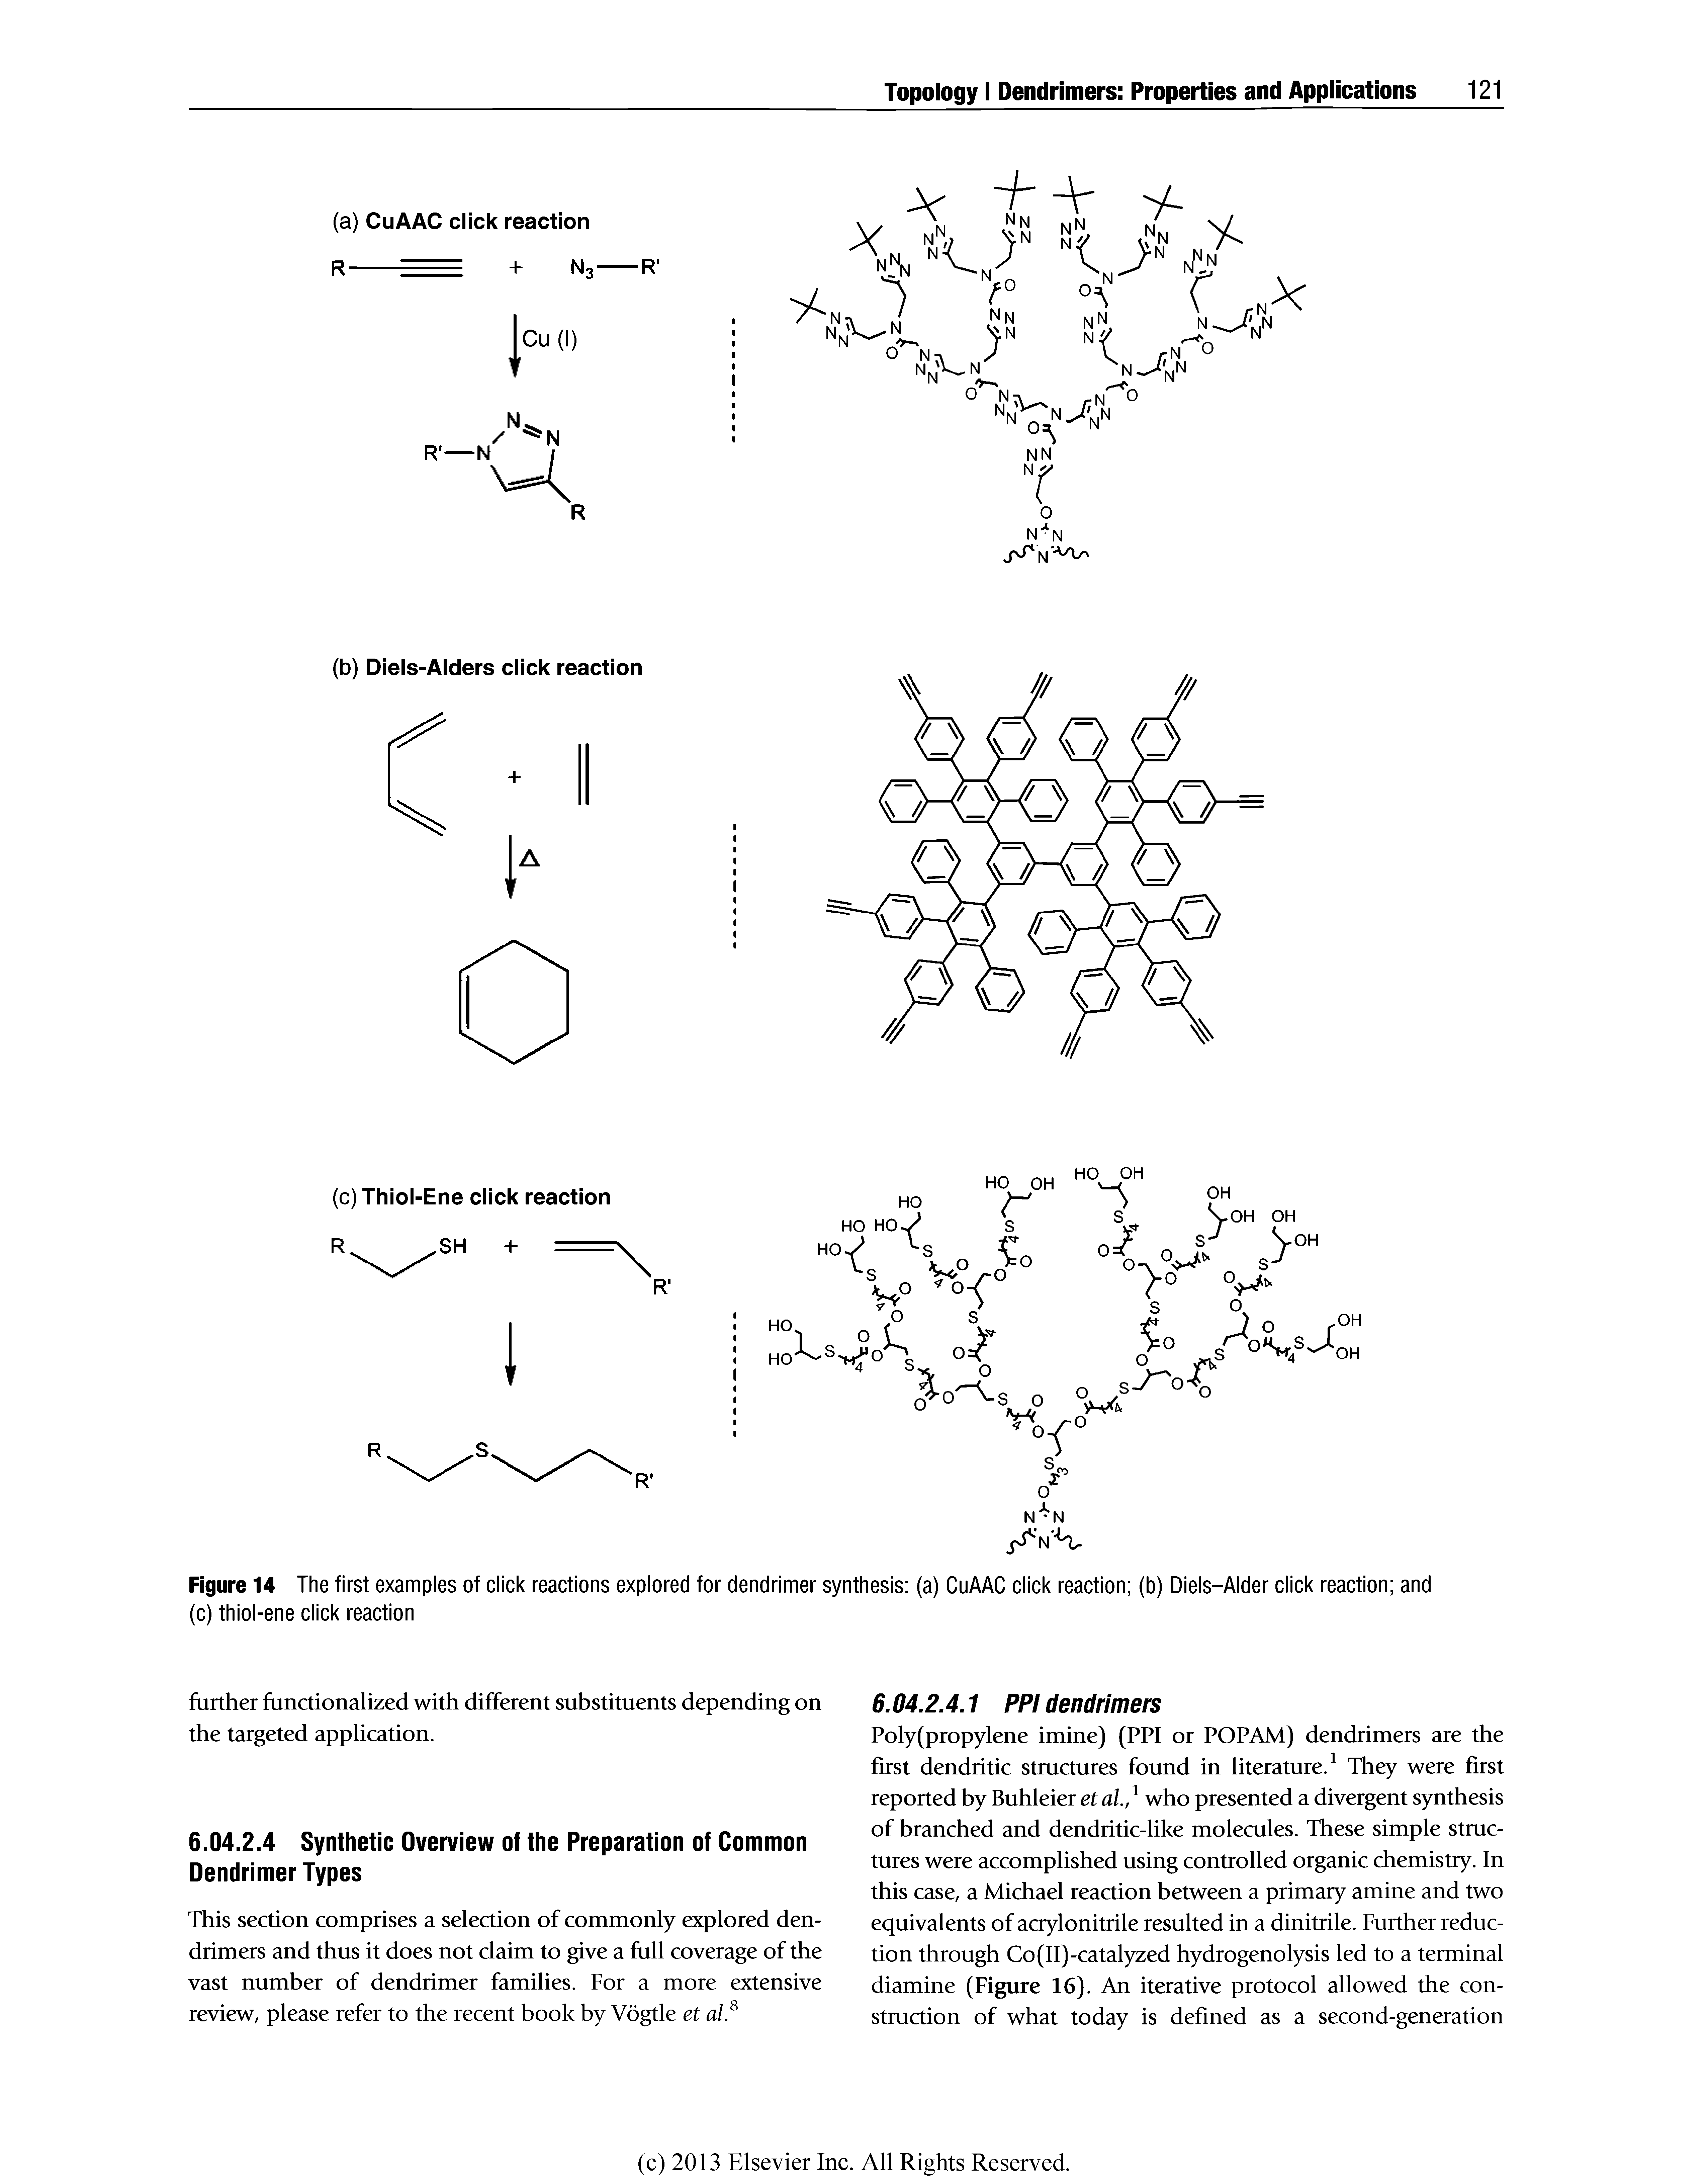 Figure 14 The first examples of click reactions explored for dendrimer synthesis (a) CuAAC click reaction (b) Diels-Alder click reaction and (c) thiol-ene click reaction...